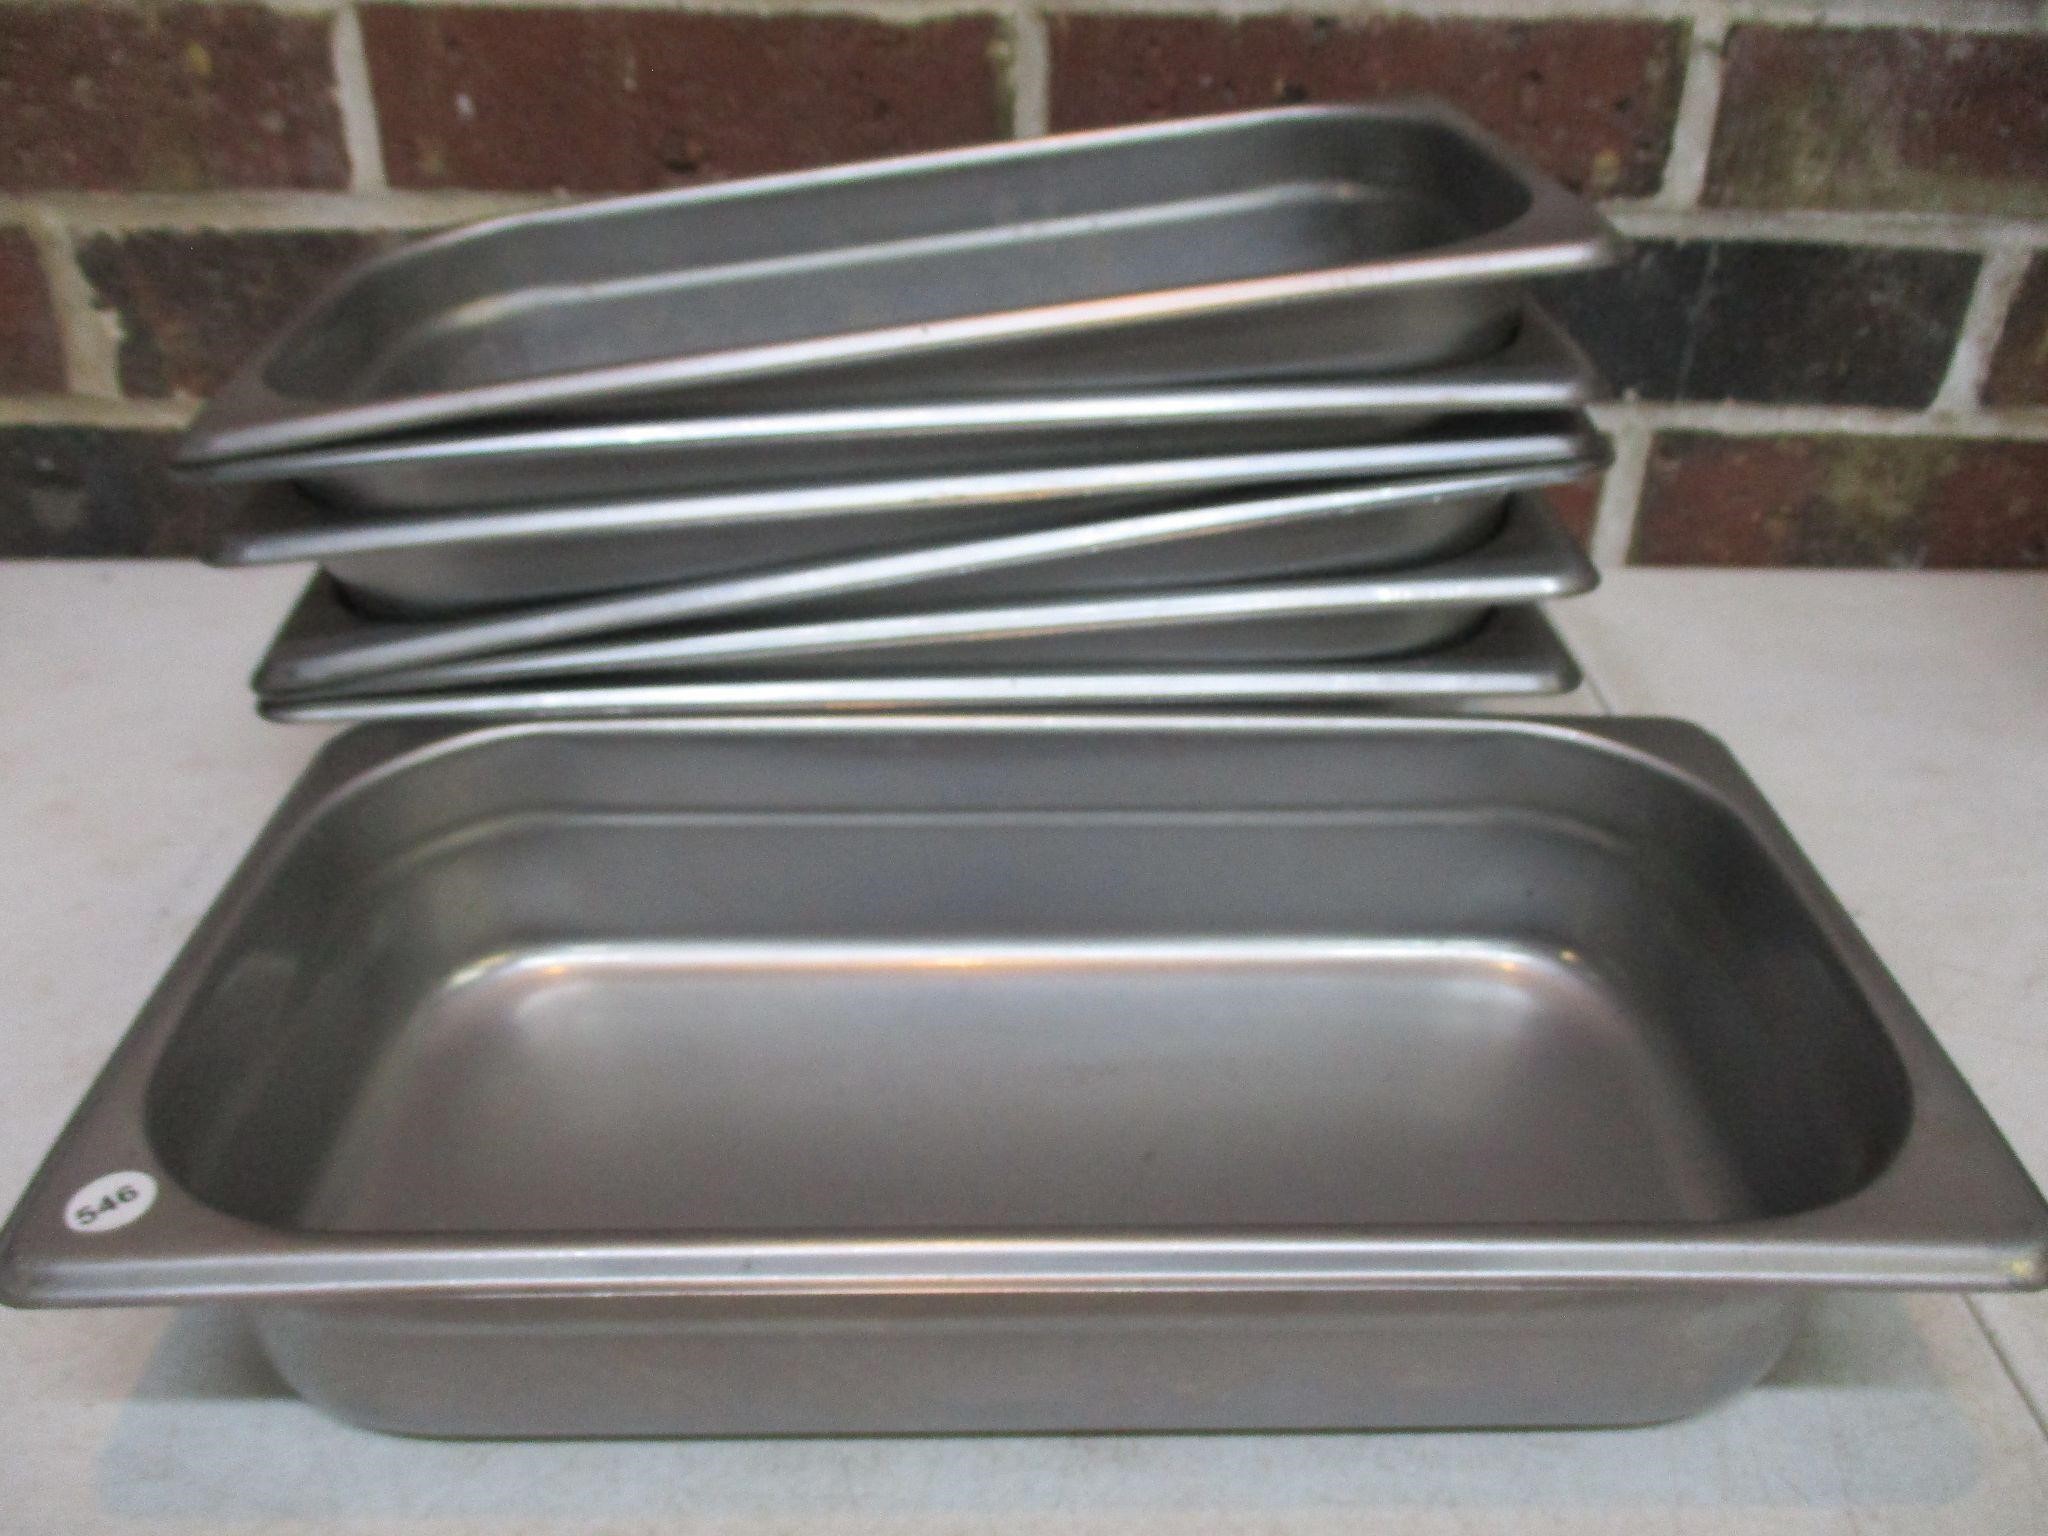 6 Stainless Steel Serving Pans